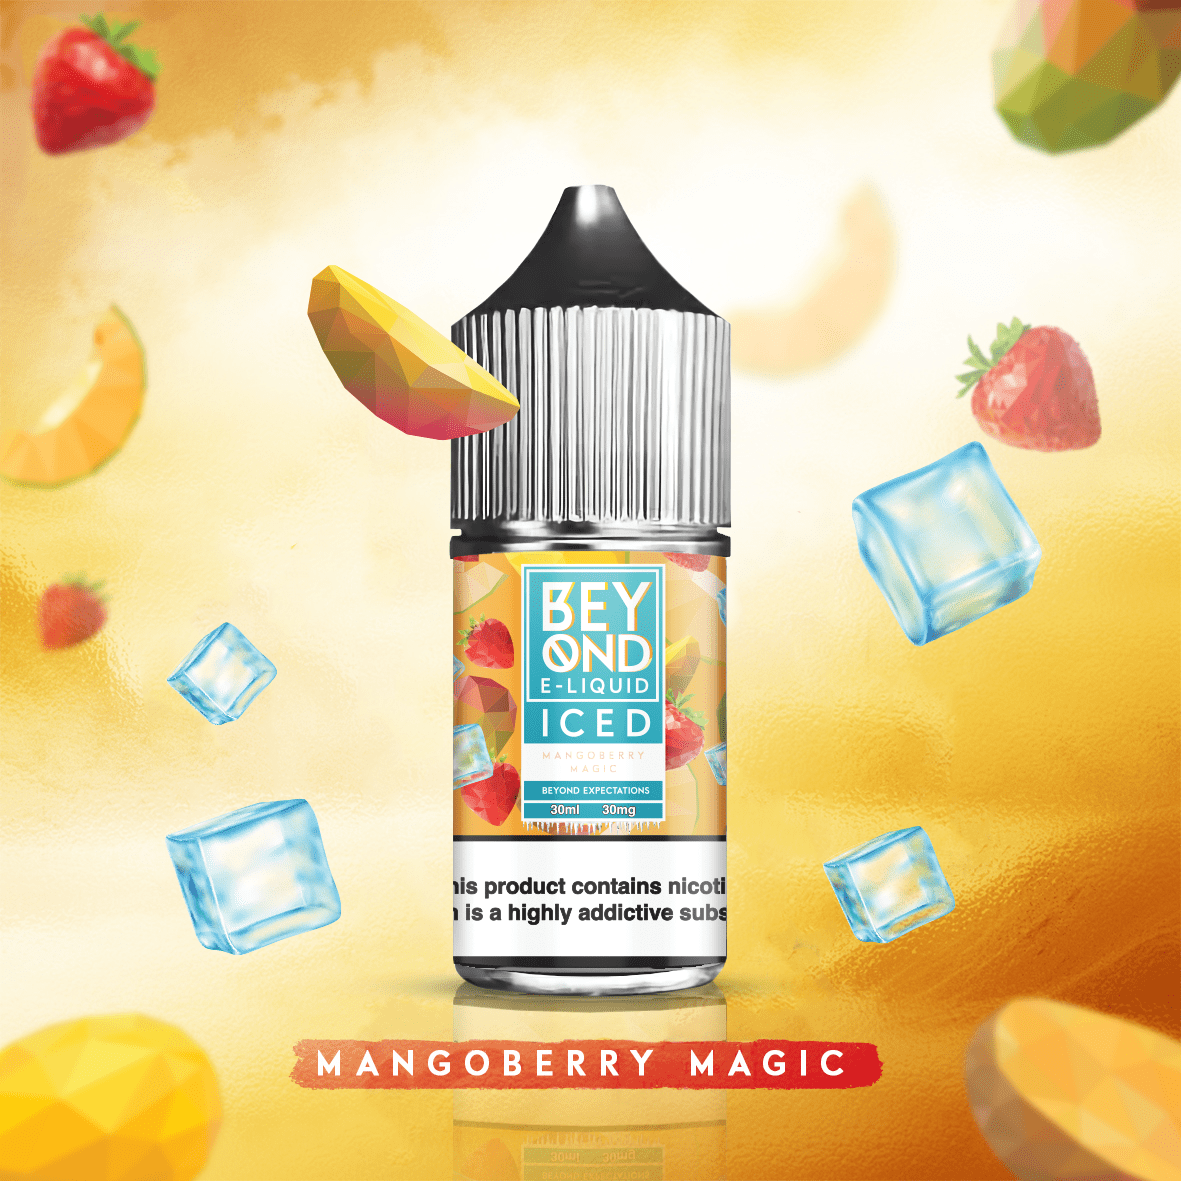 Buy Beyond Iced Mango Berry Magic By Ivg Salt At Best Price In Pakistan